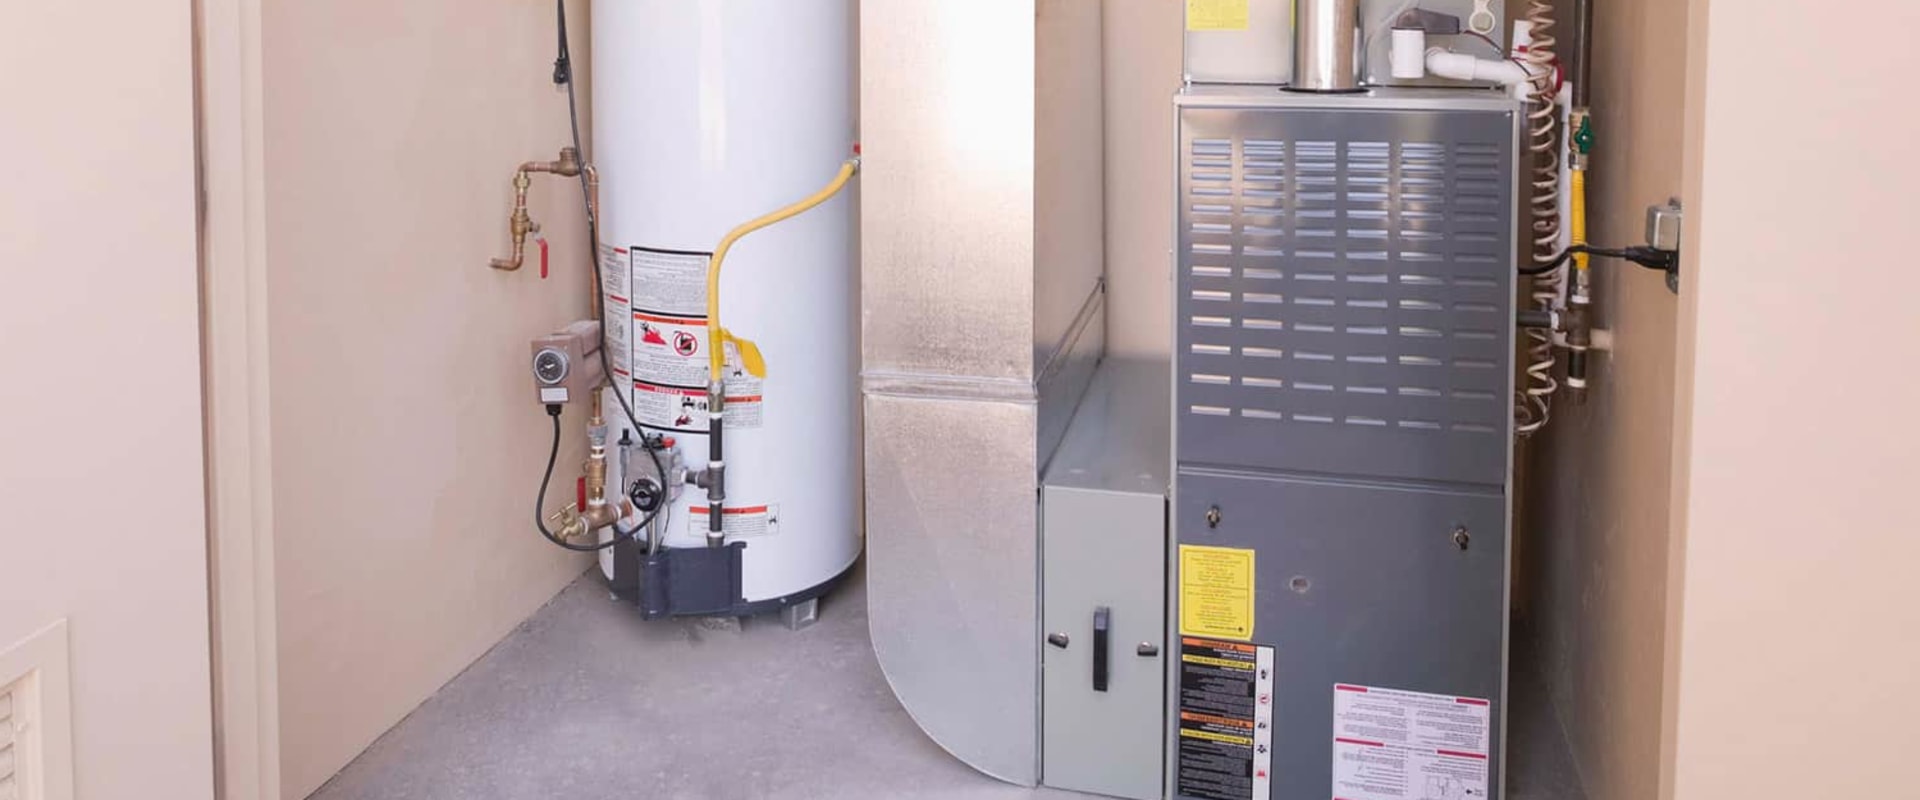 The Importance of Permits for Replacing a Hot Water Heater in Florida